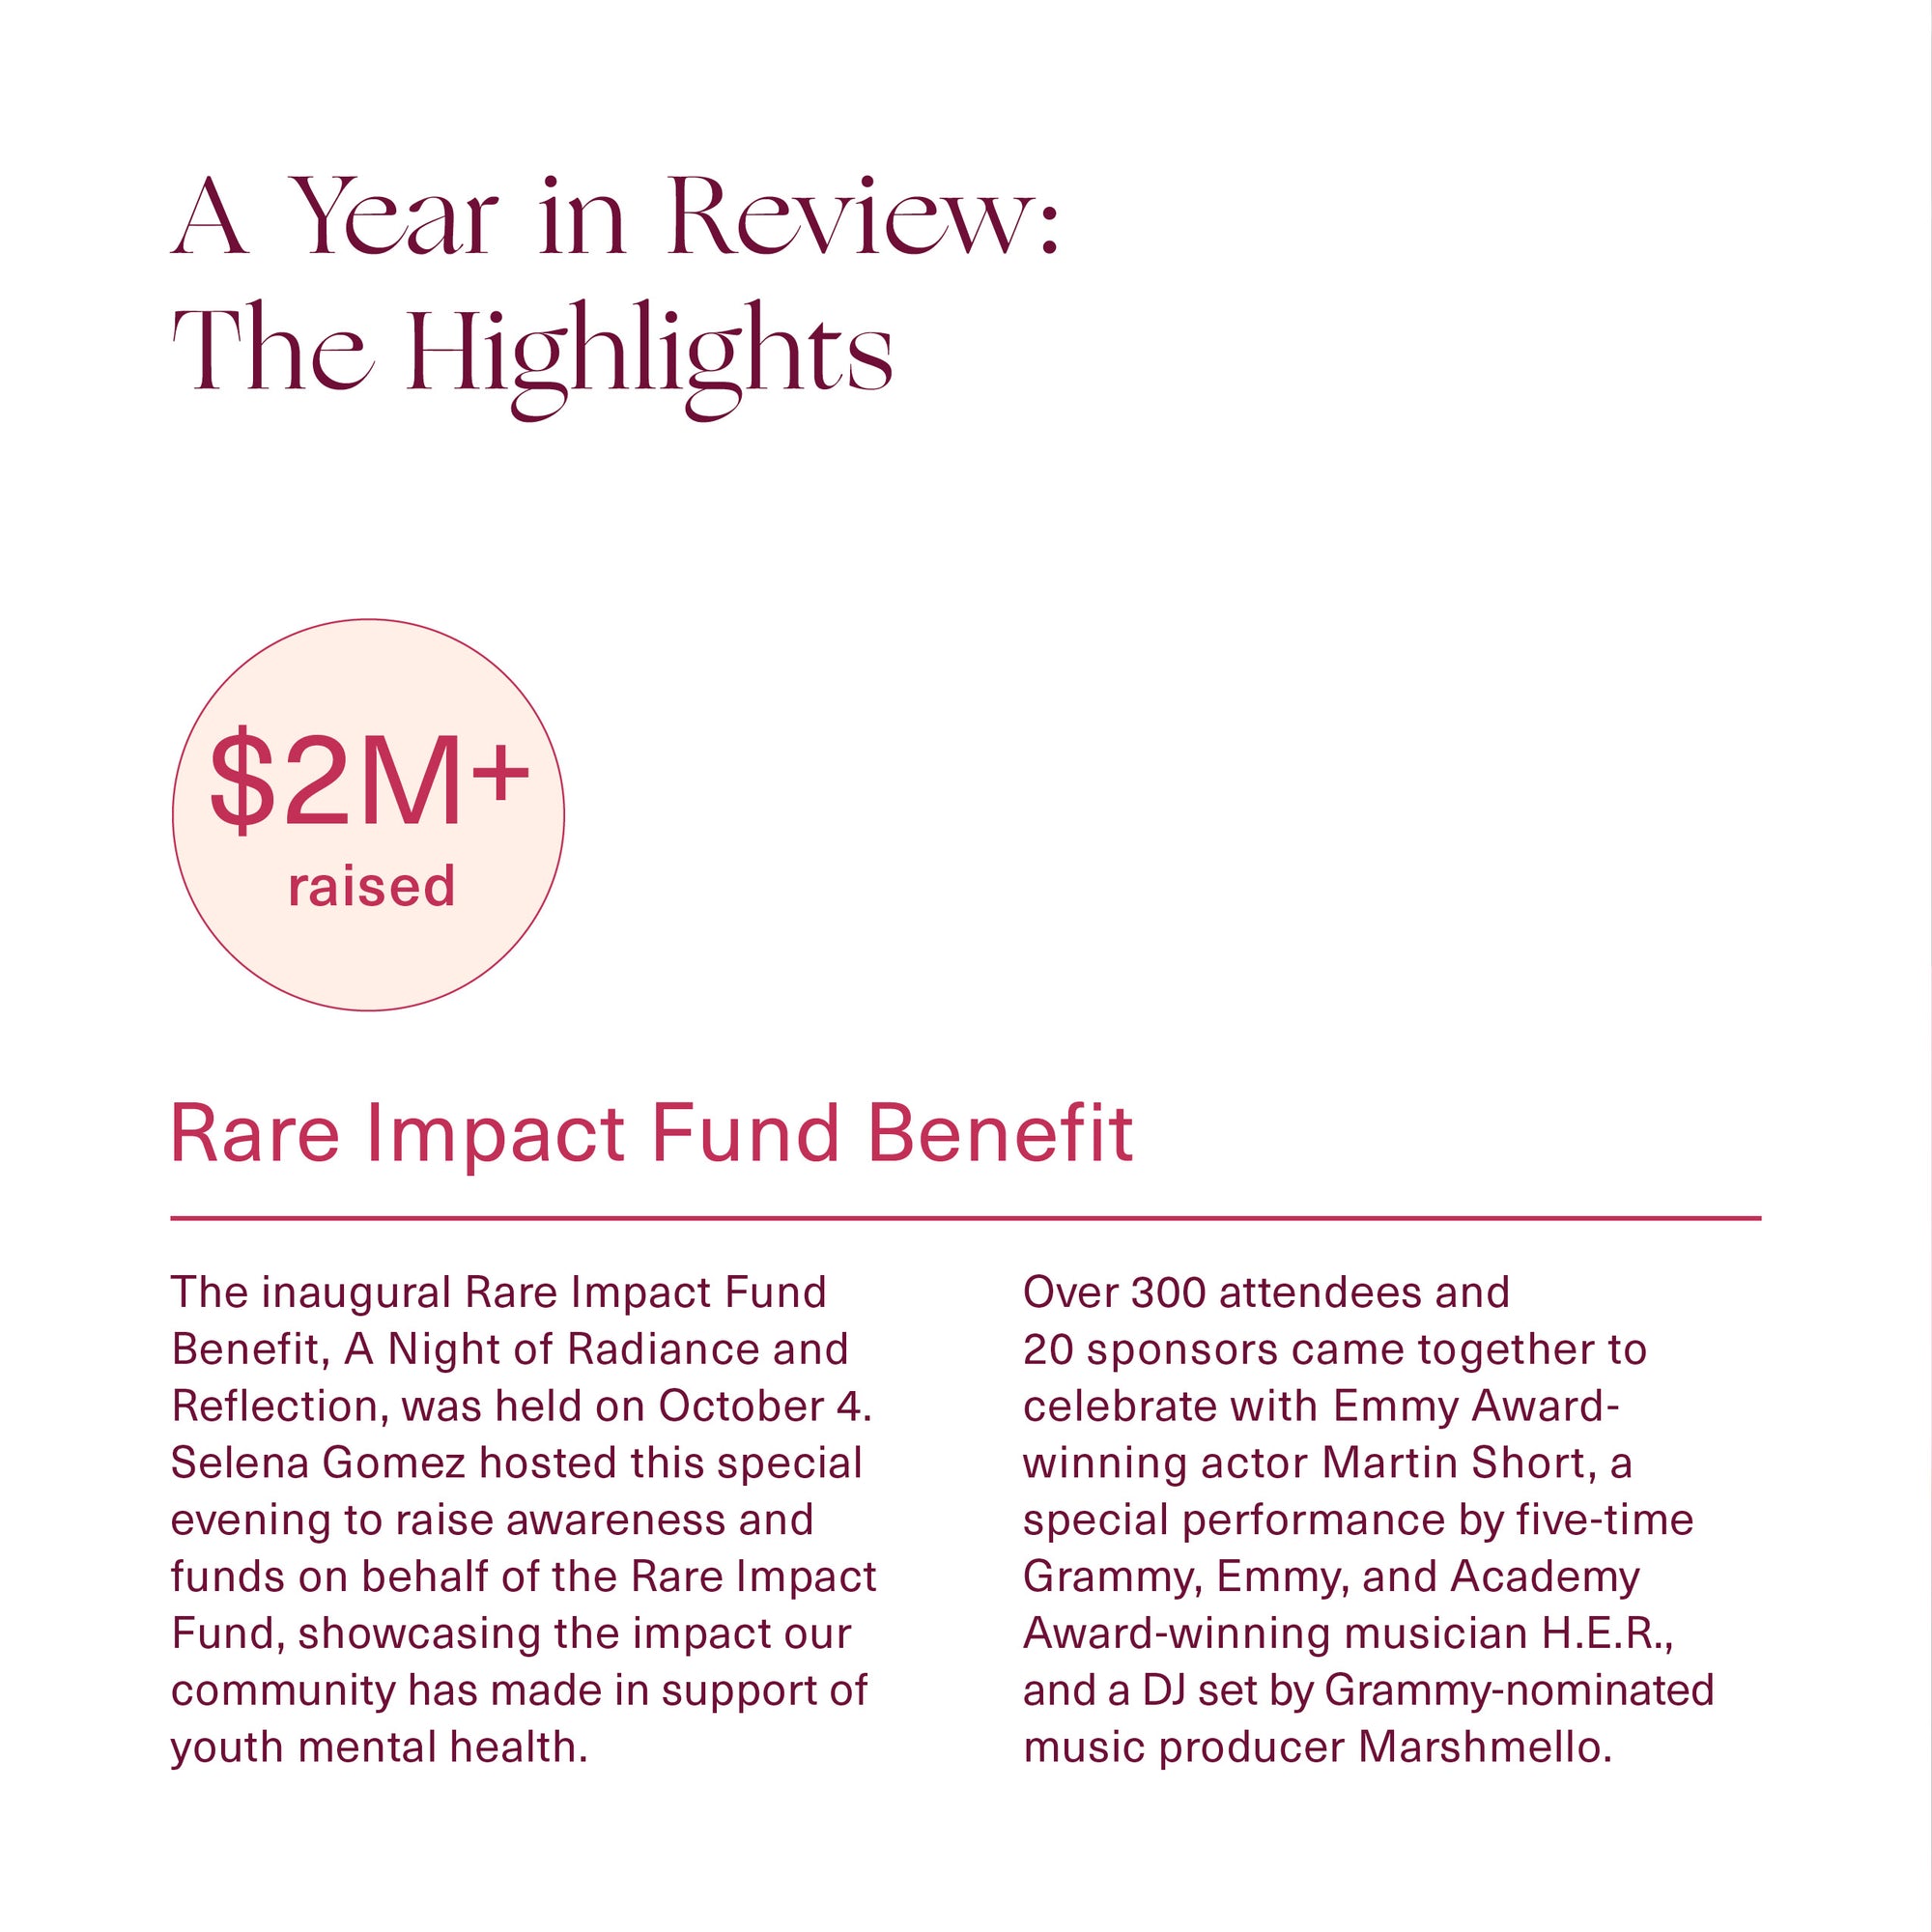 A year in review—$2 million raised